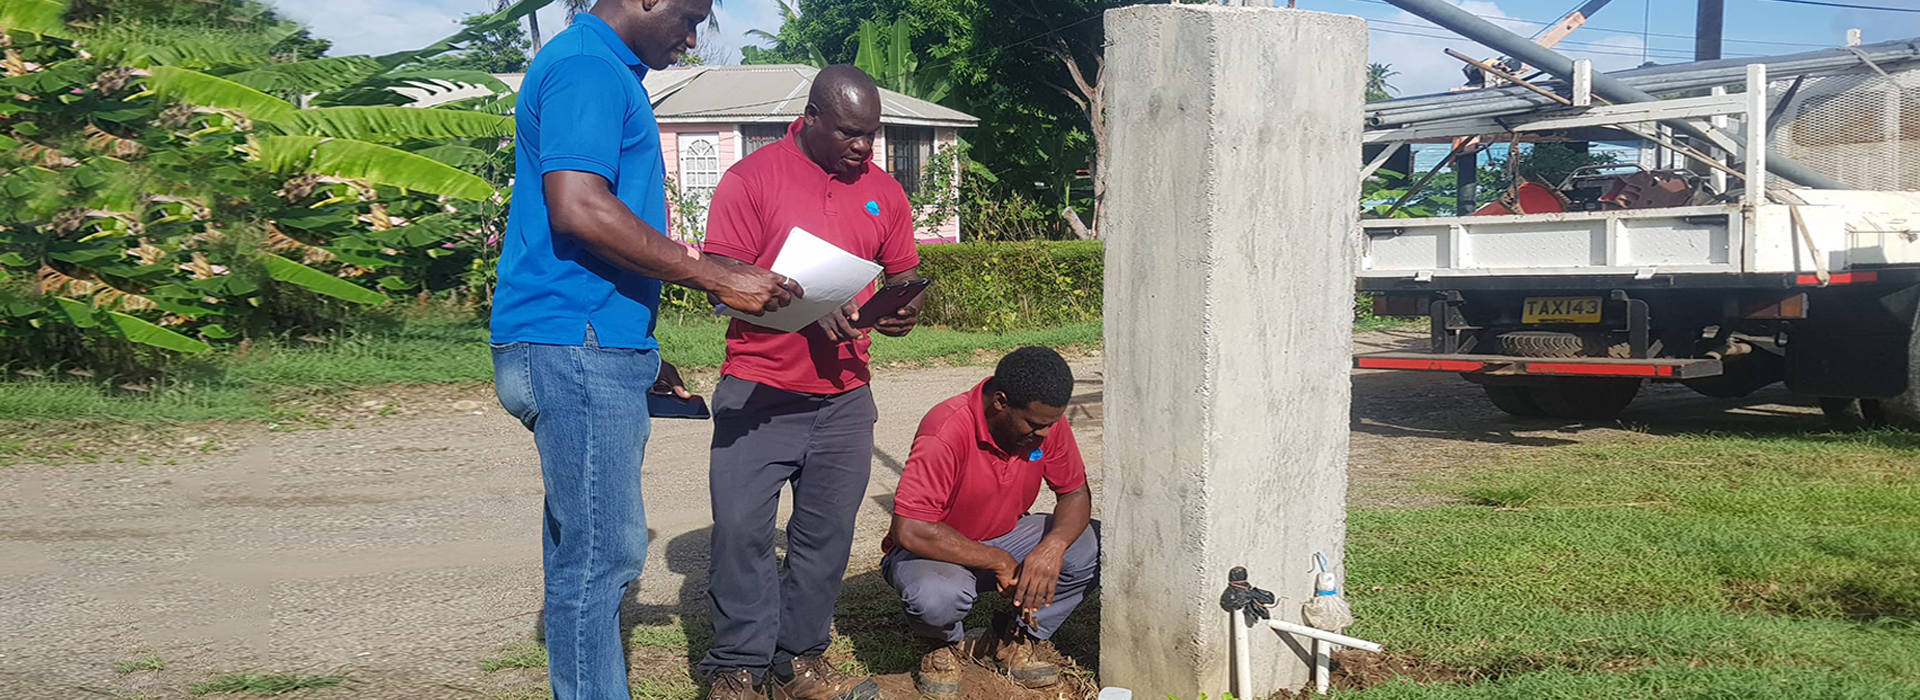 Employees of the Grenadian supplier collect water data.